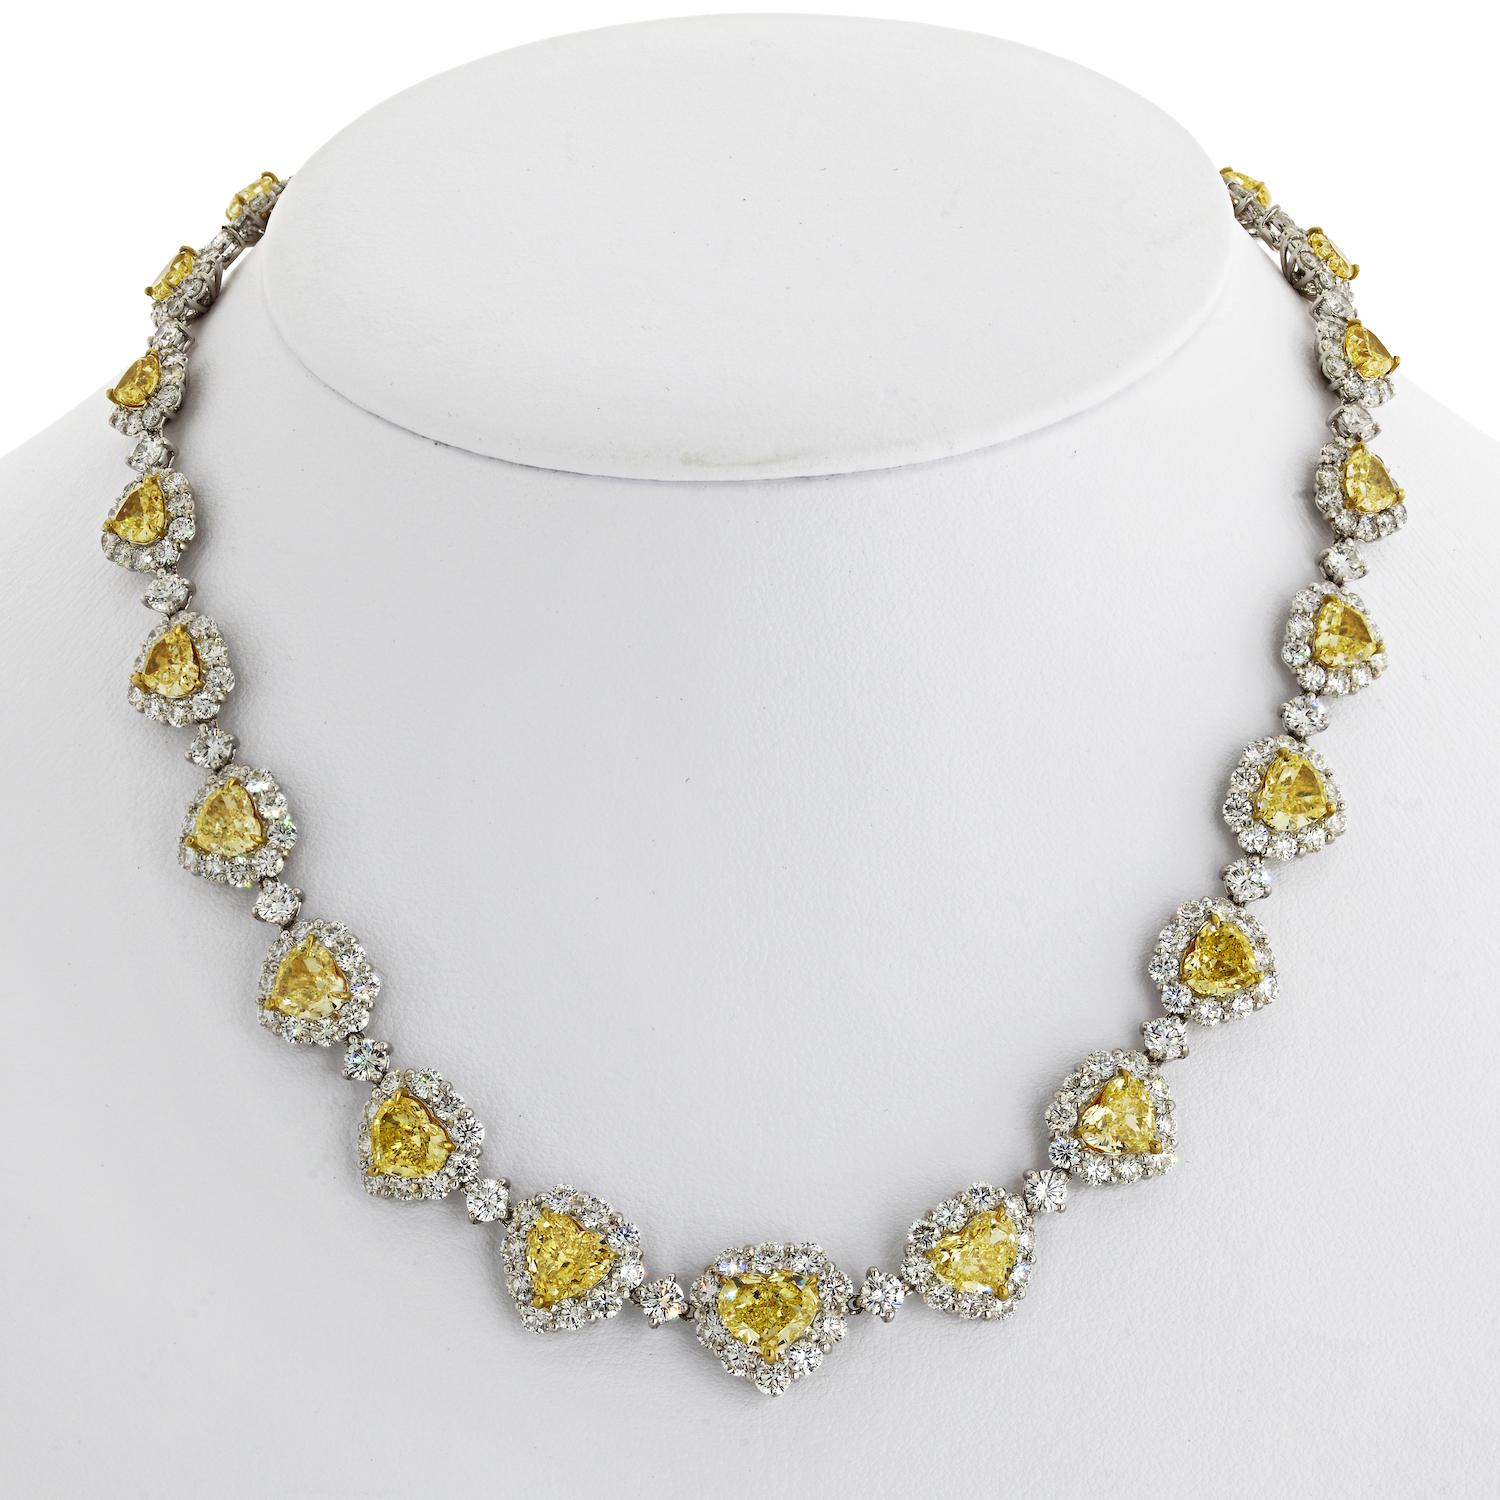 50 carat Fancy Intense Yellow Heart And White Diamond Infinity Necklace.

It doesn't get any more regal than this stunning infinity necklace. Heart-shaped yellow diamonds are surrounded by round white diamonds set in 18k white gold hearts. Take a